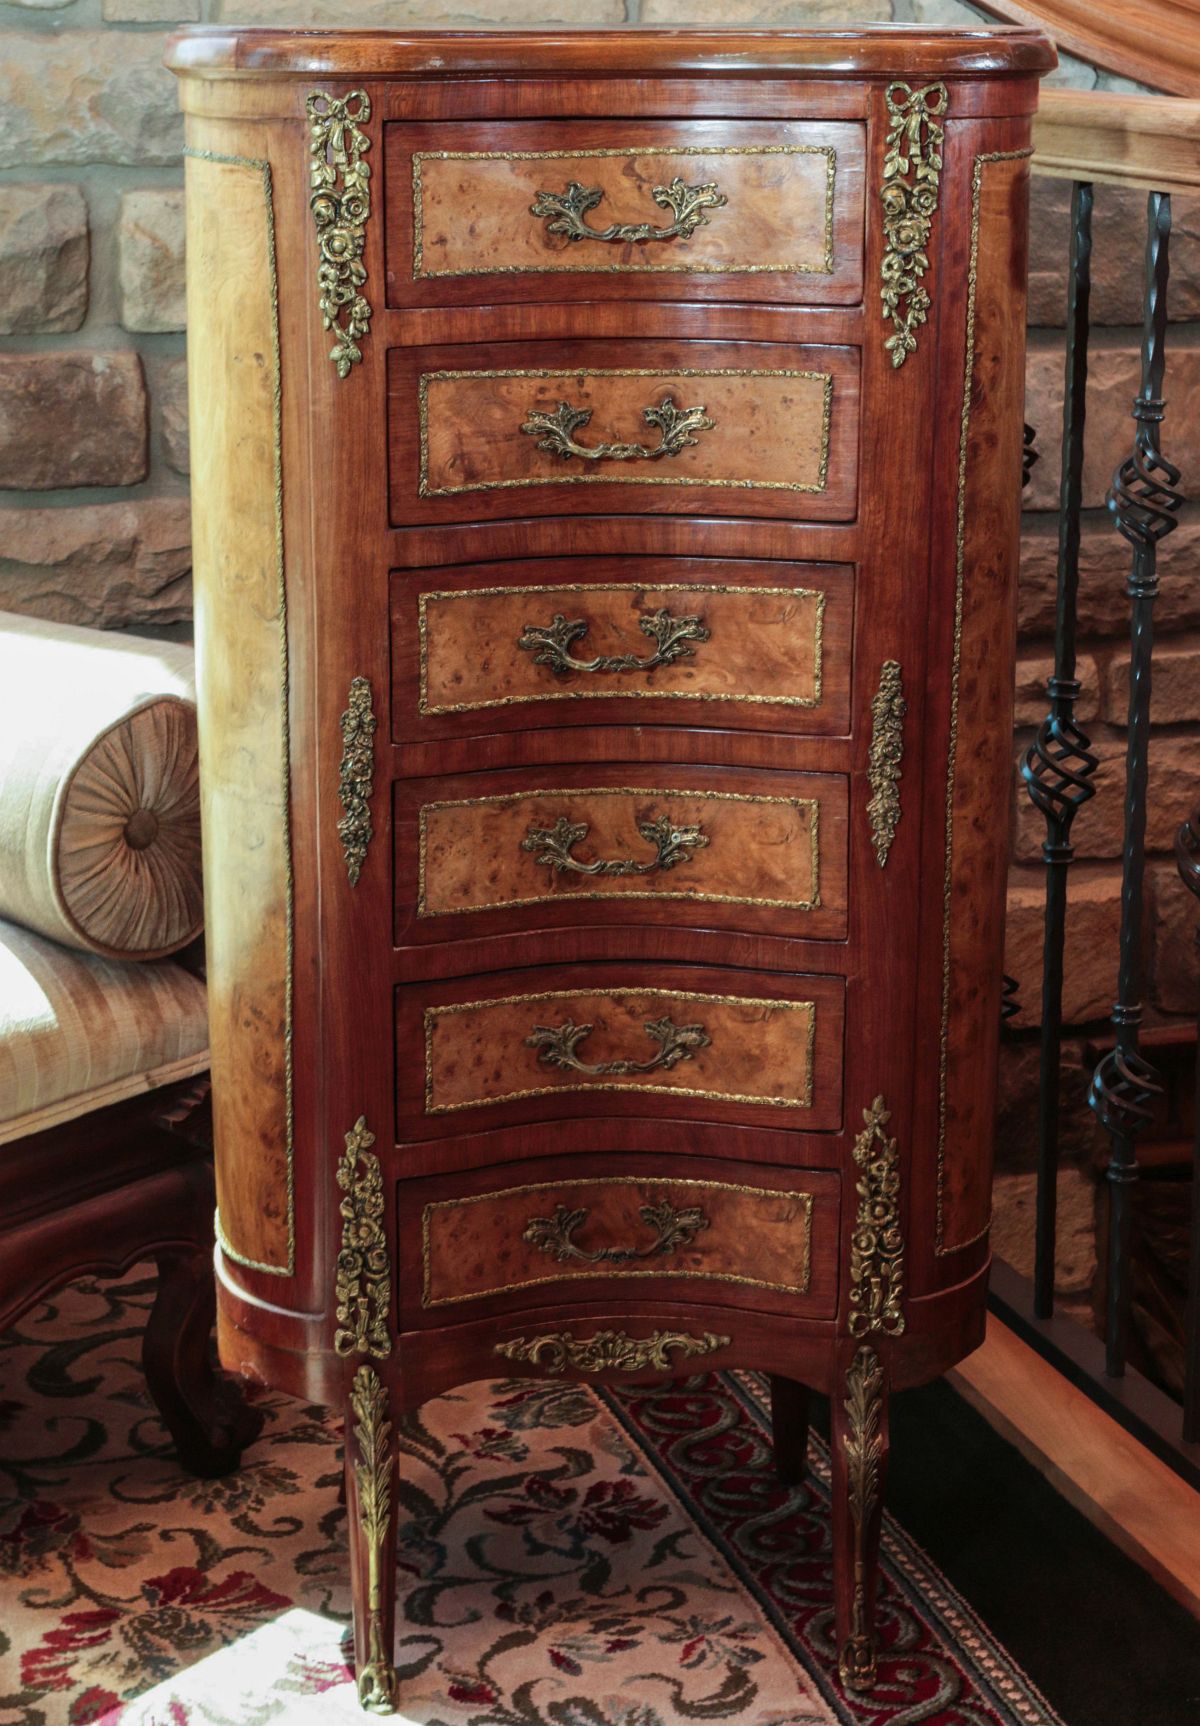 A FRENCH STYLE LINGERIE CHEST WITH ORMOLU AND BURL